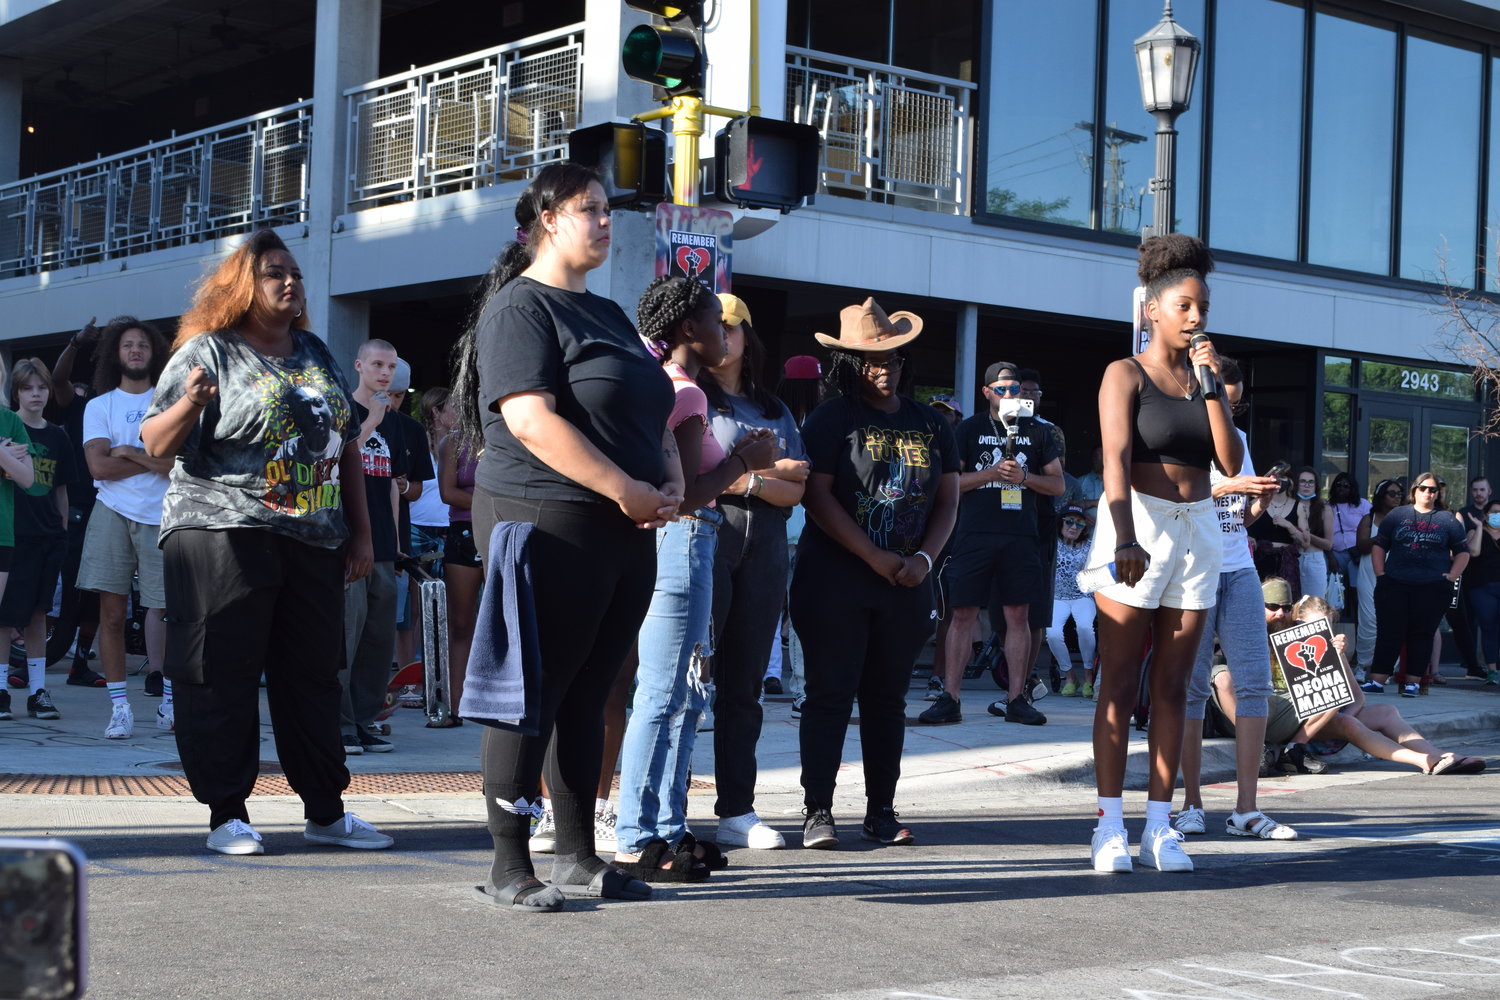 On June 14, youth activists speak to the trauma experienced after witnessing the driver barreling through the protest and killing Deona Marie Knajdek the previous night. (Photo by Jill Boogren)